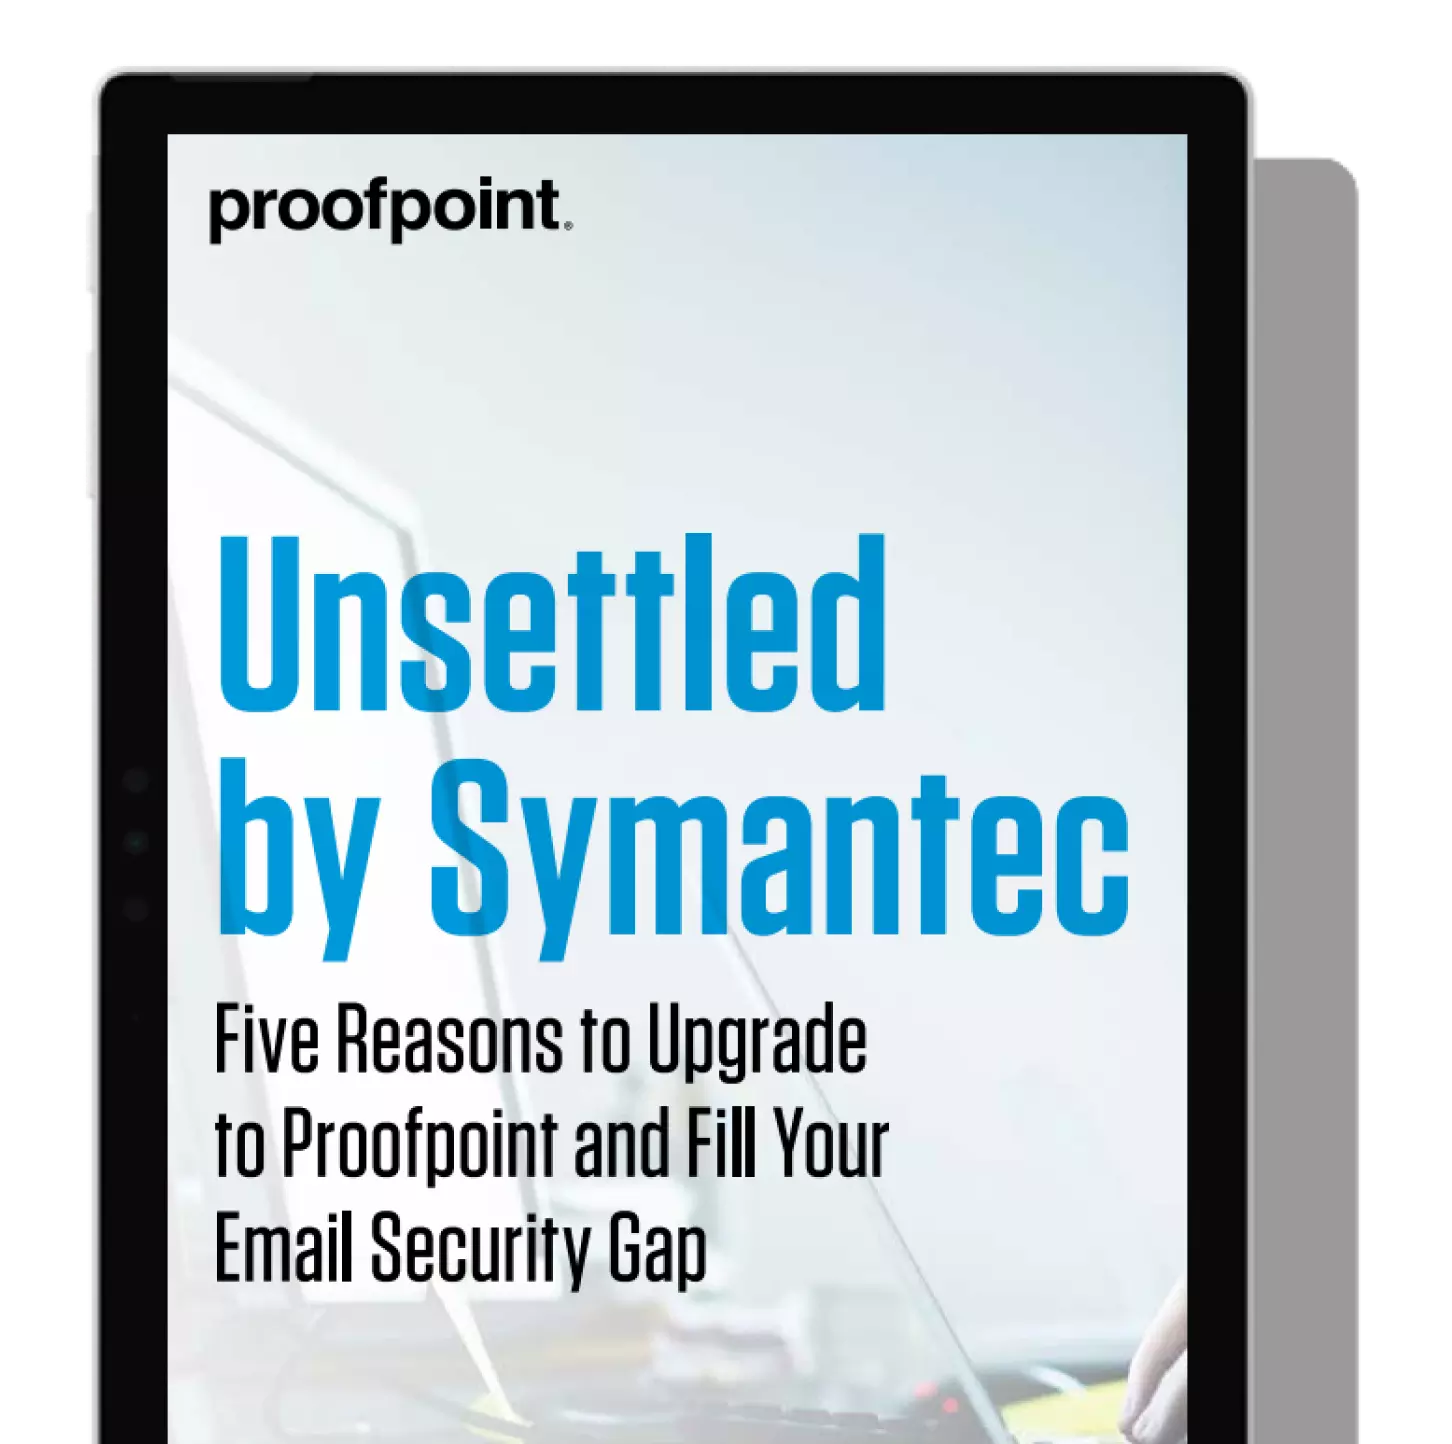 Unsettled by Symantec